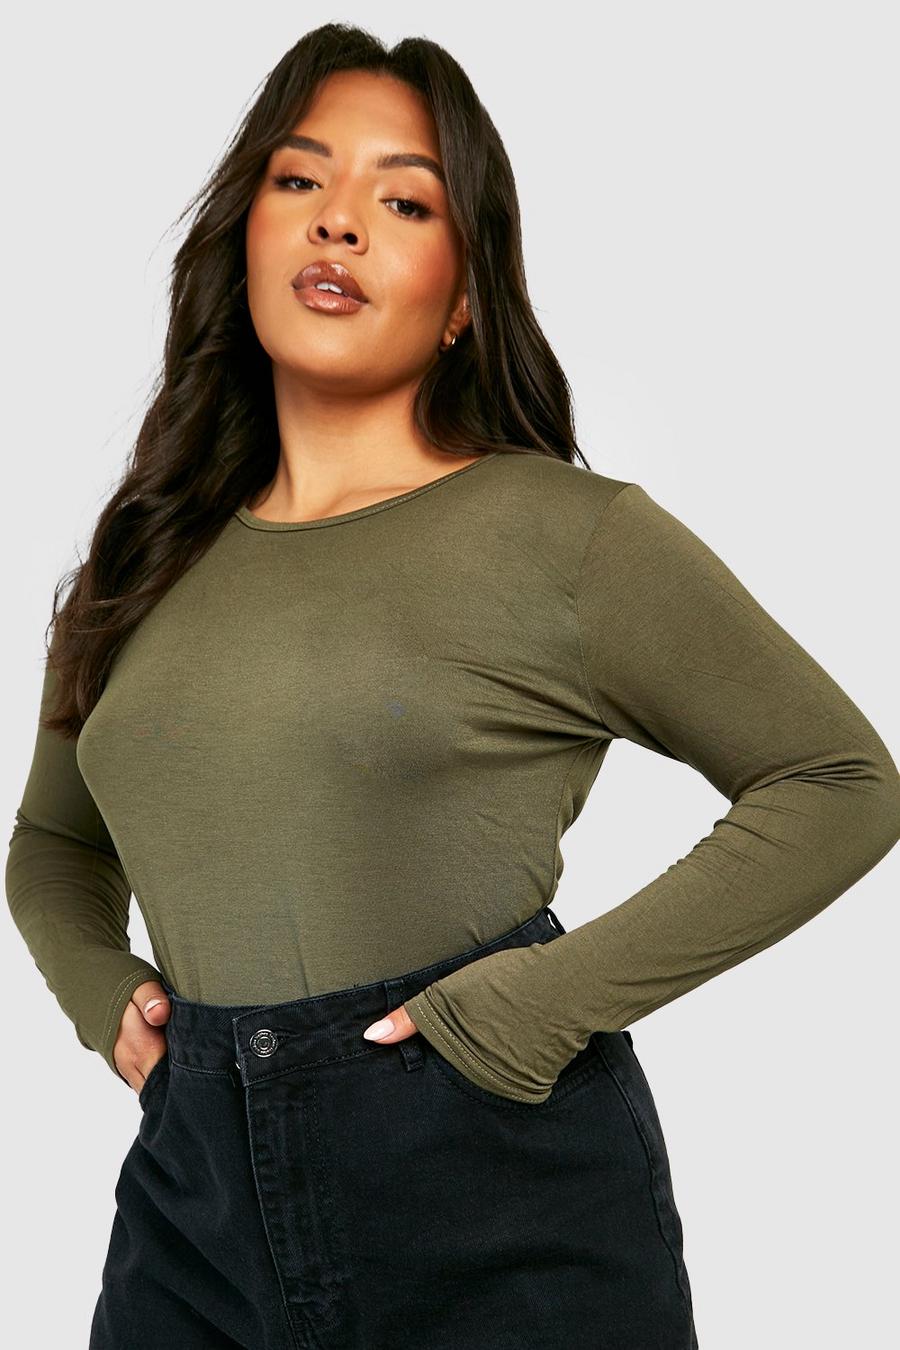 Plus Size Kleding | Outfits In Grote Maten | boohoo NL